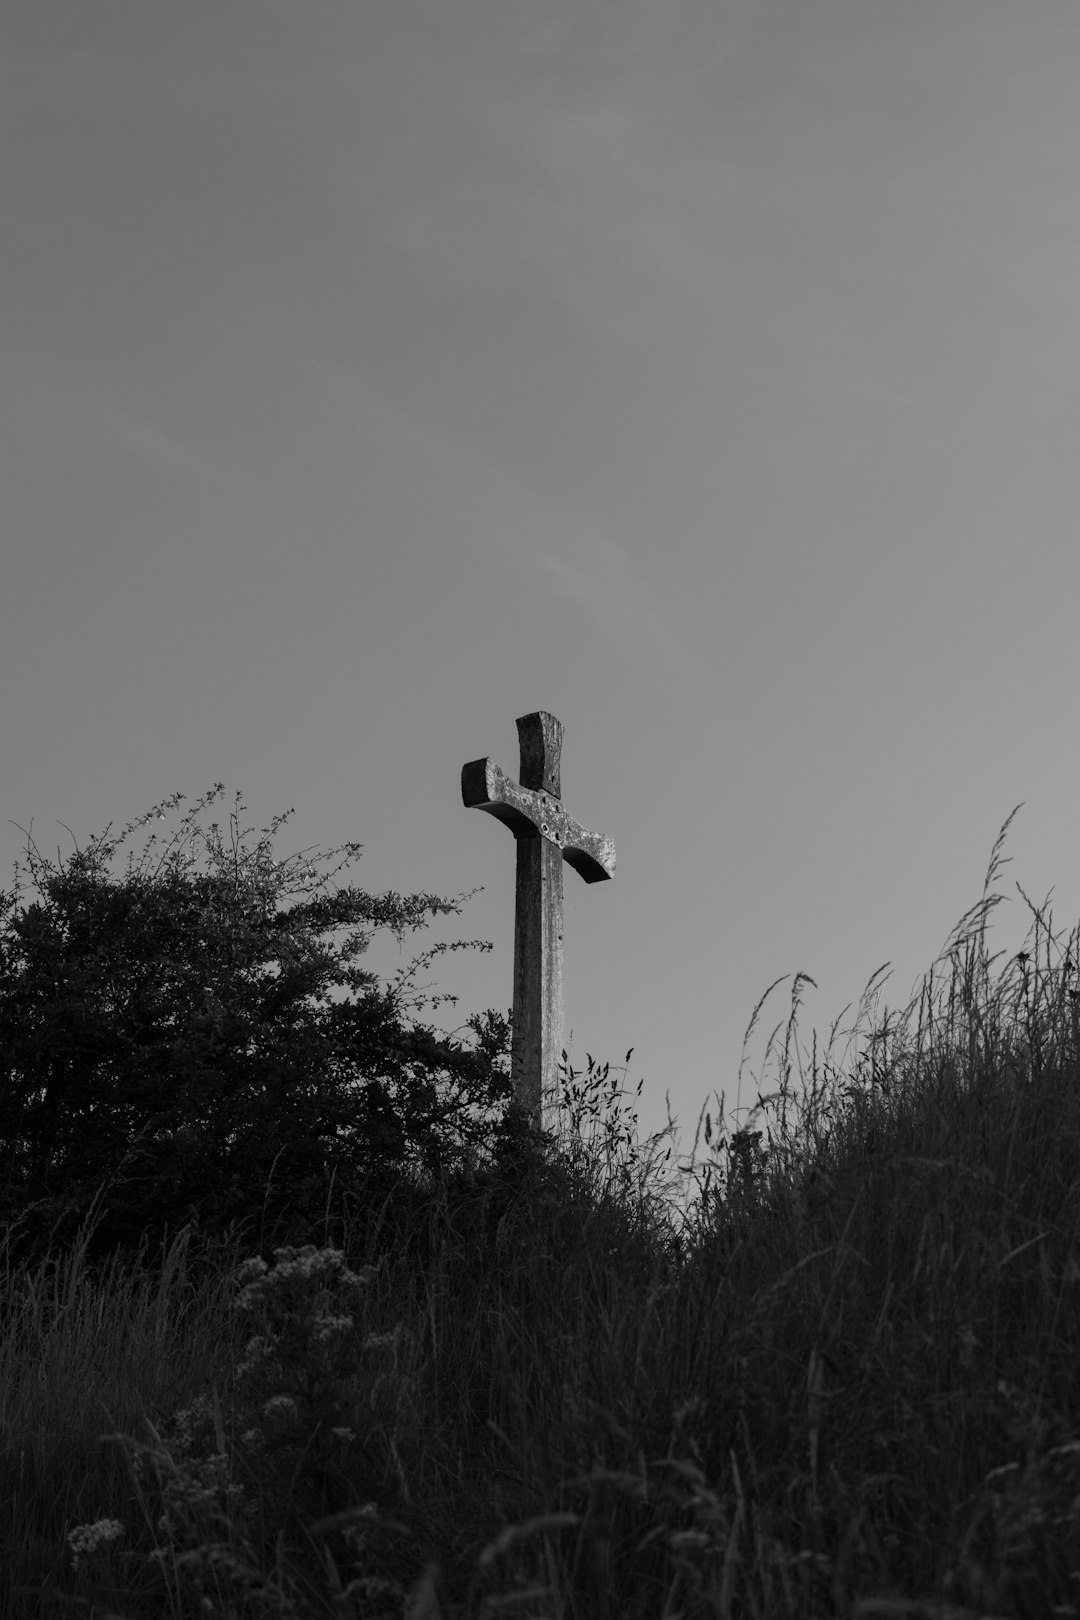 grayscale photo of cross on top of pole